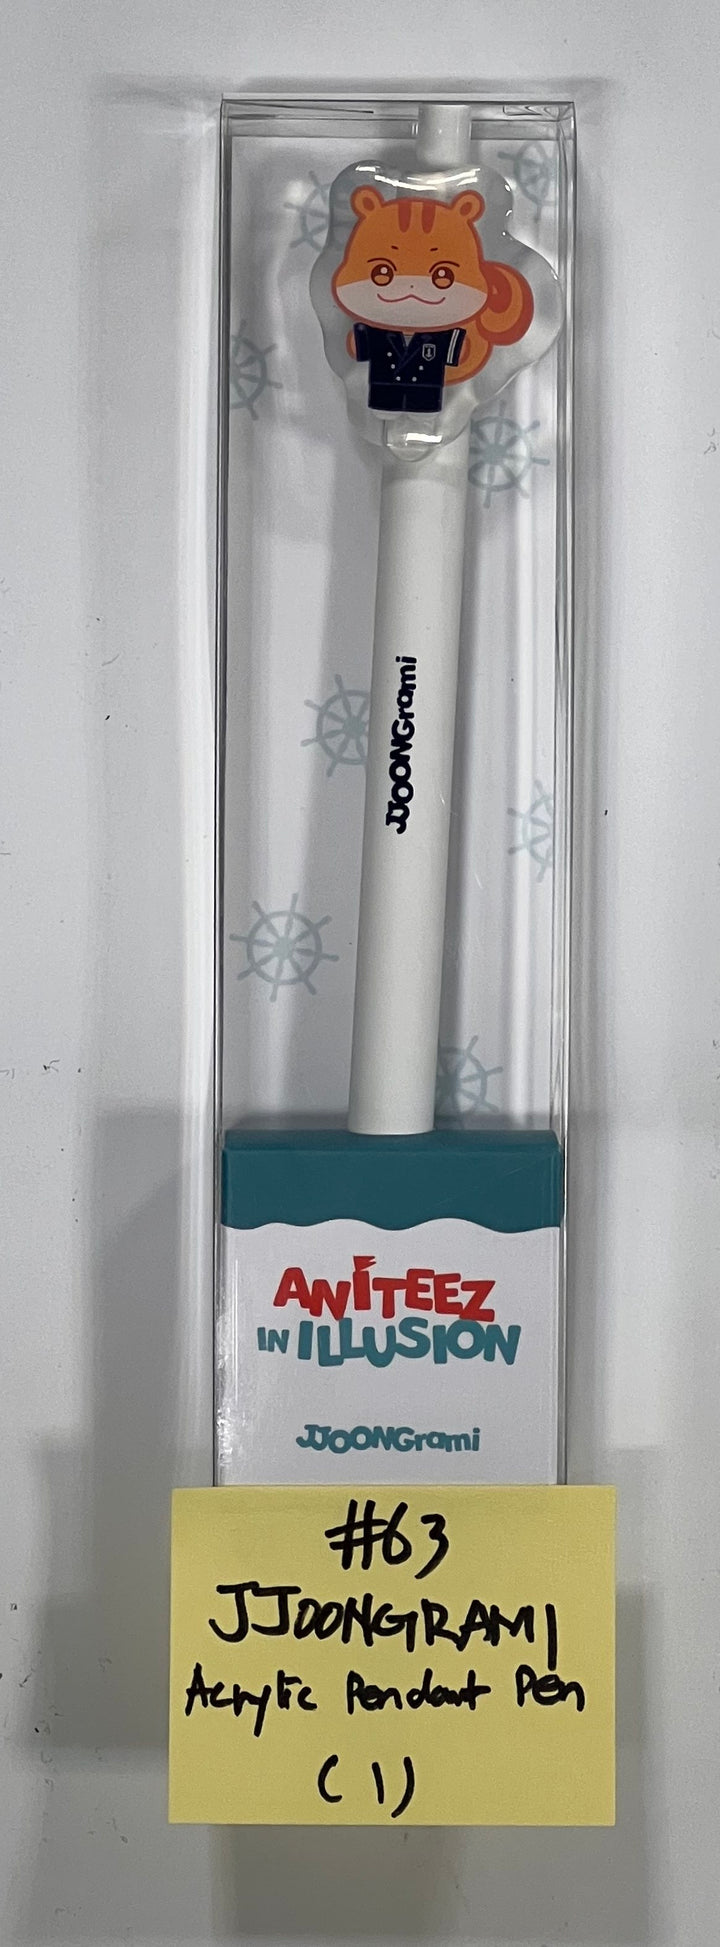 ATEEZ X ANITEEZ ADVENTURE "ANITEEZ IN ILLUSION" - Pop-Up Store Official MD [Acrlic pendant pen, L-Holder Set, Log Photo Note, Tin candle, Mini Cross Bag, Cookie Box, Clear Sticker] [24.2.16]